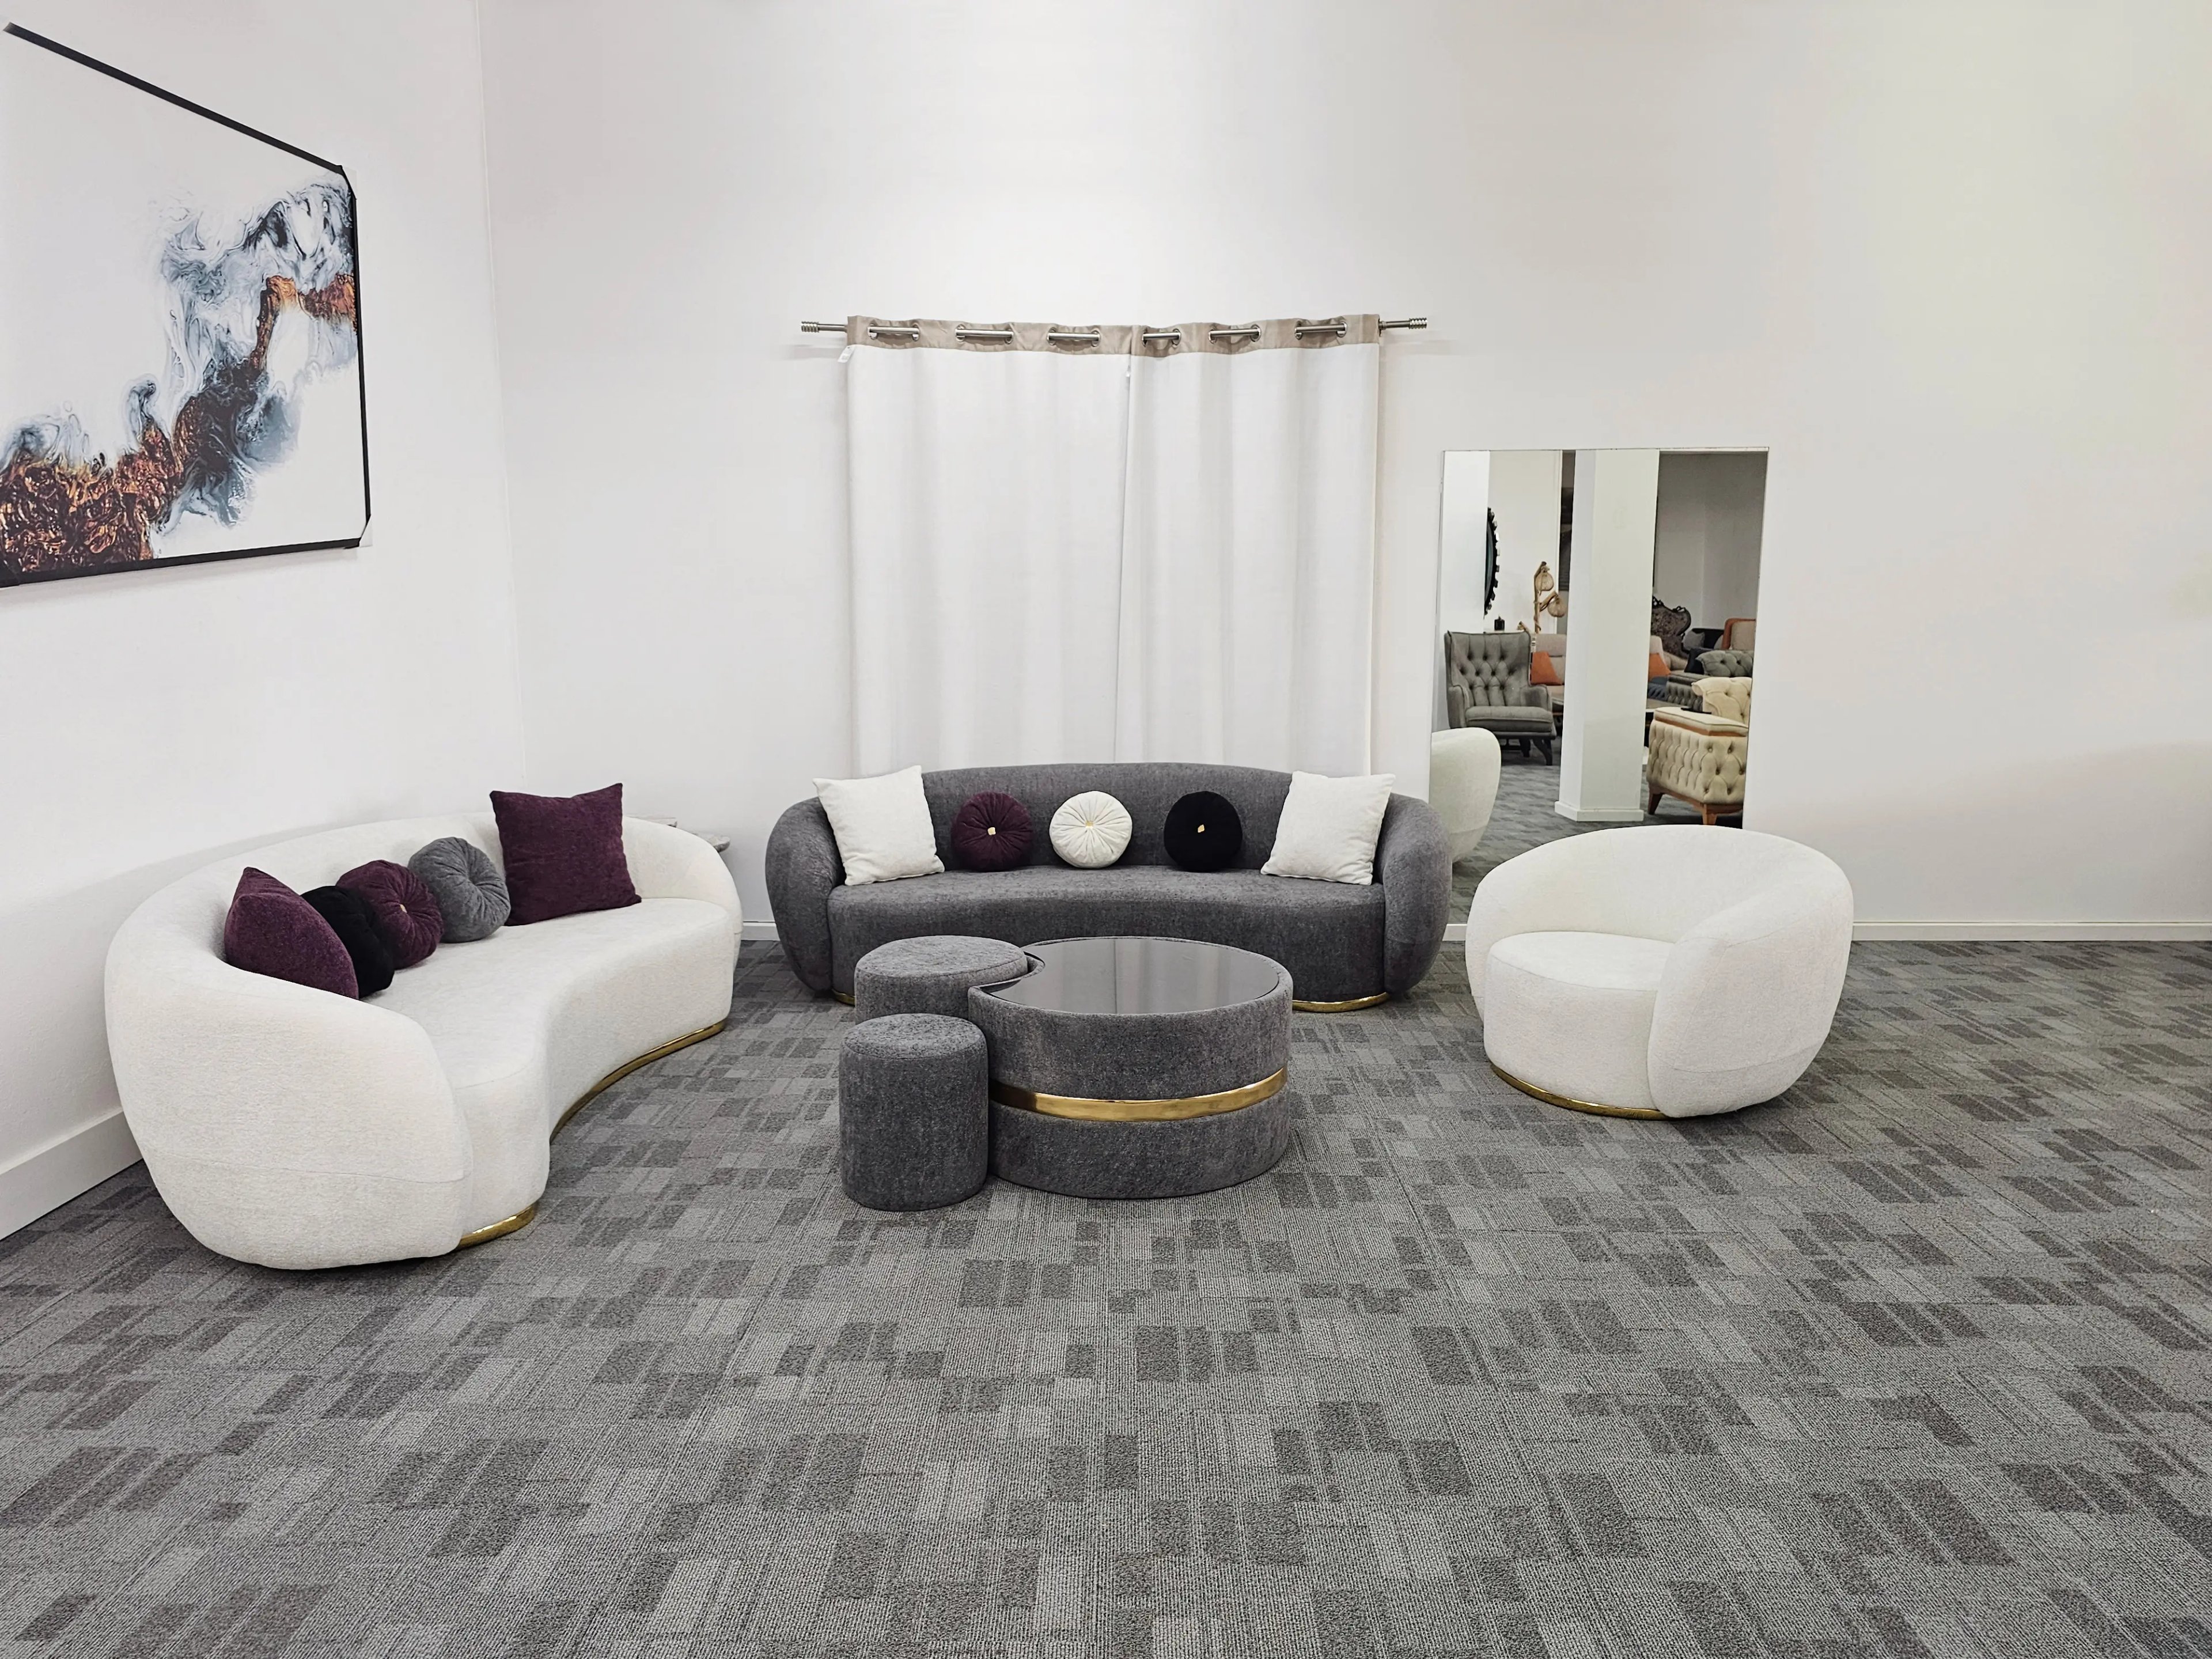 Oyster- Grey and White Curved Sofa Set